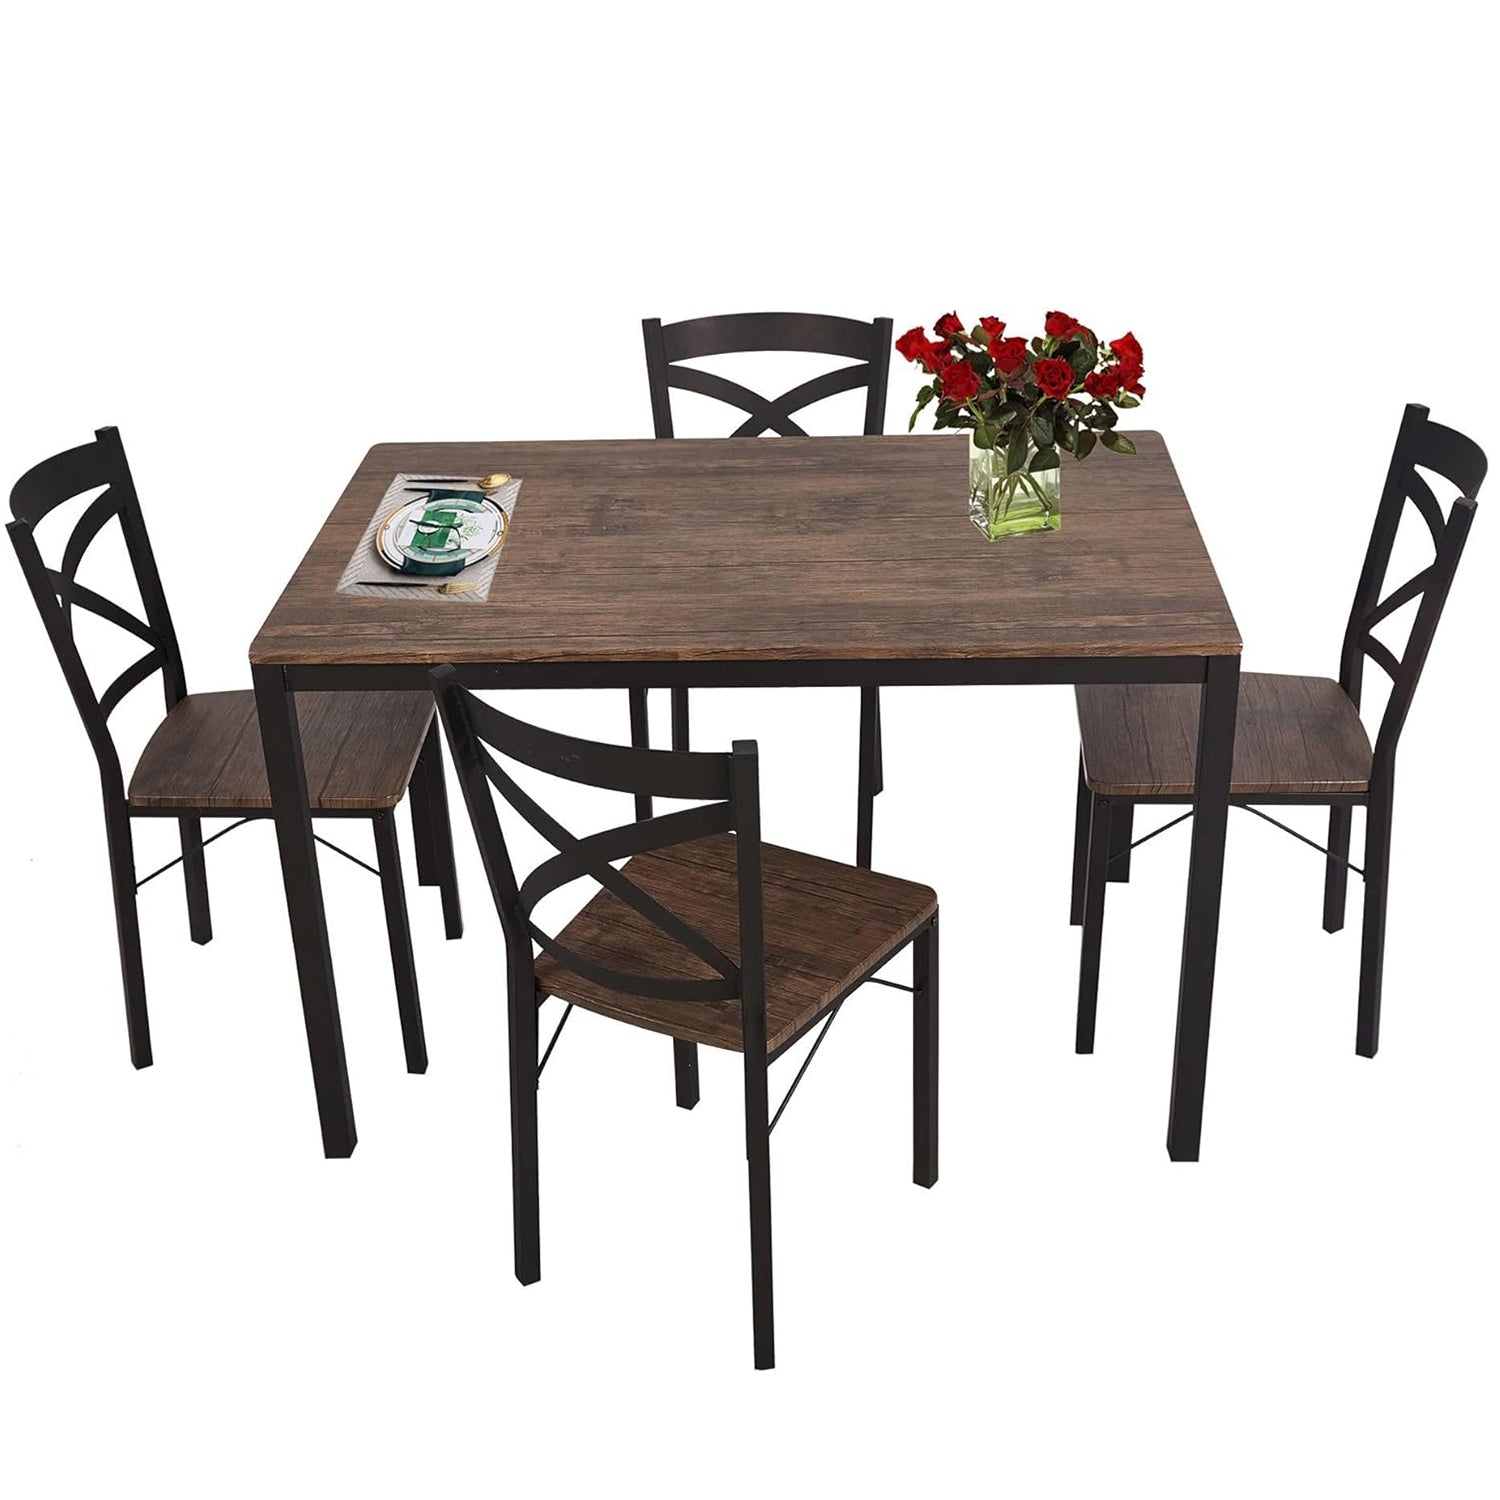 5 Piece Dining Table Set, 1 Dining Table 47.2" for 4 with 4 Dining Chairs Modern Dinette, Metal Backrest